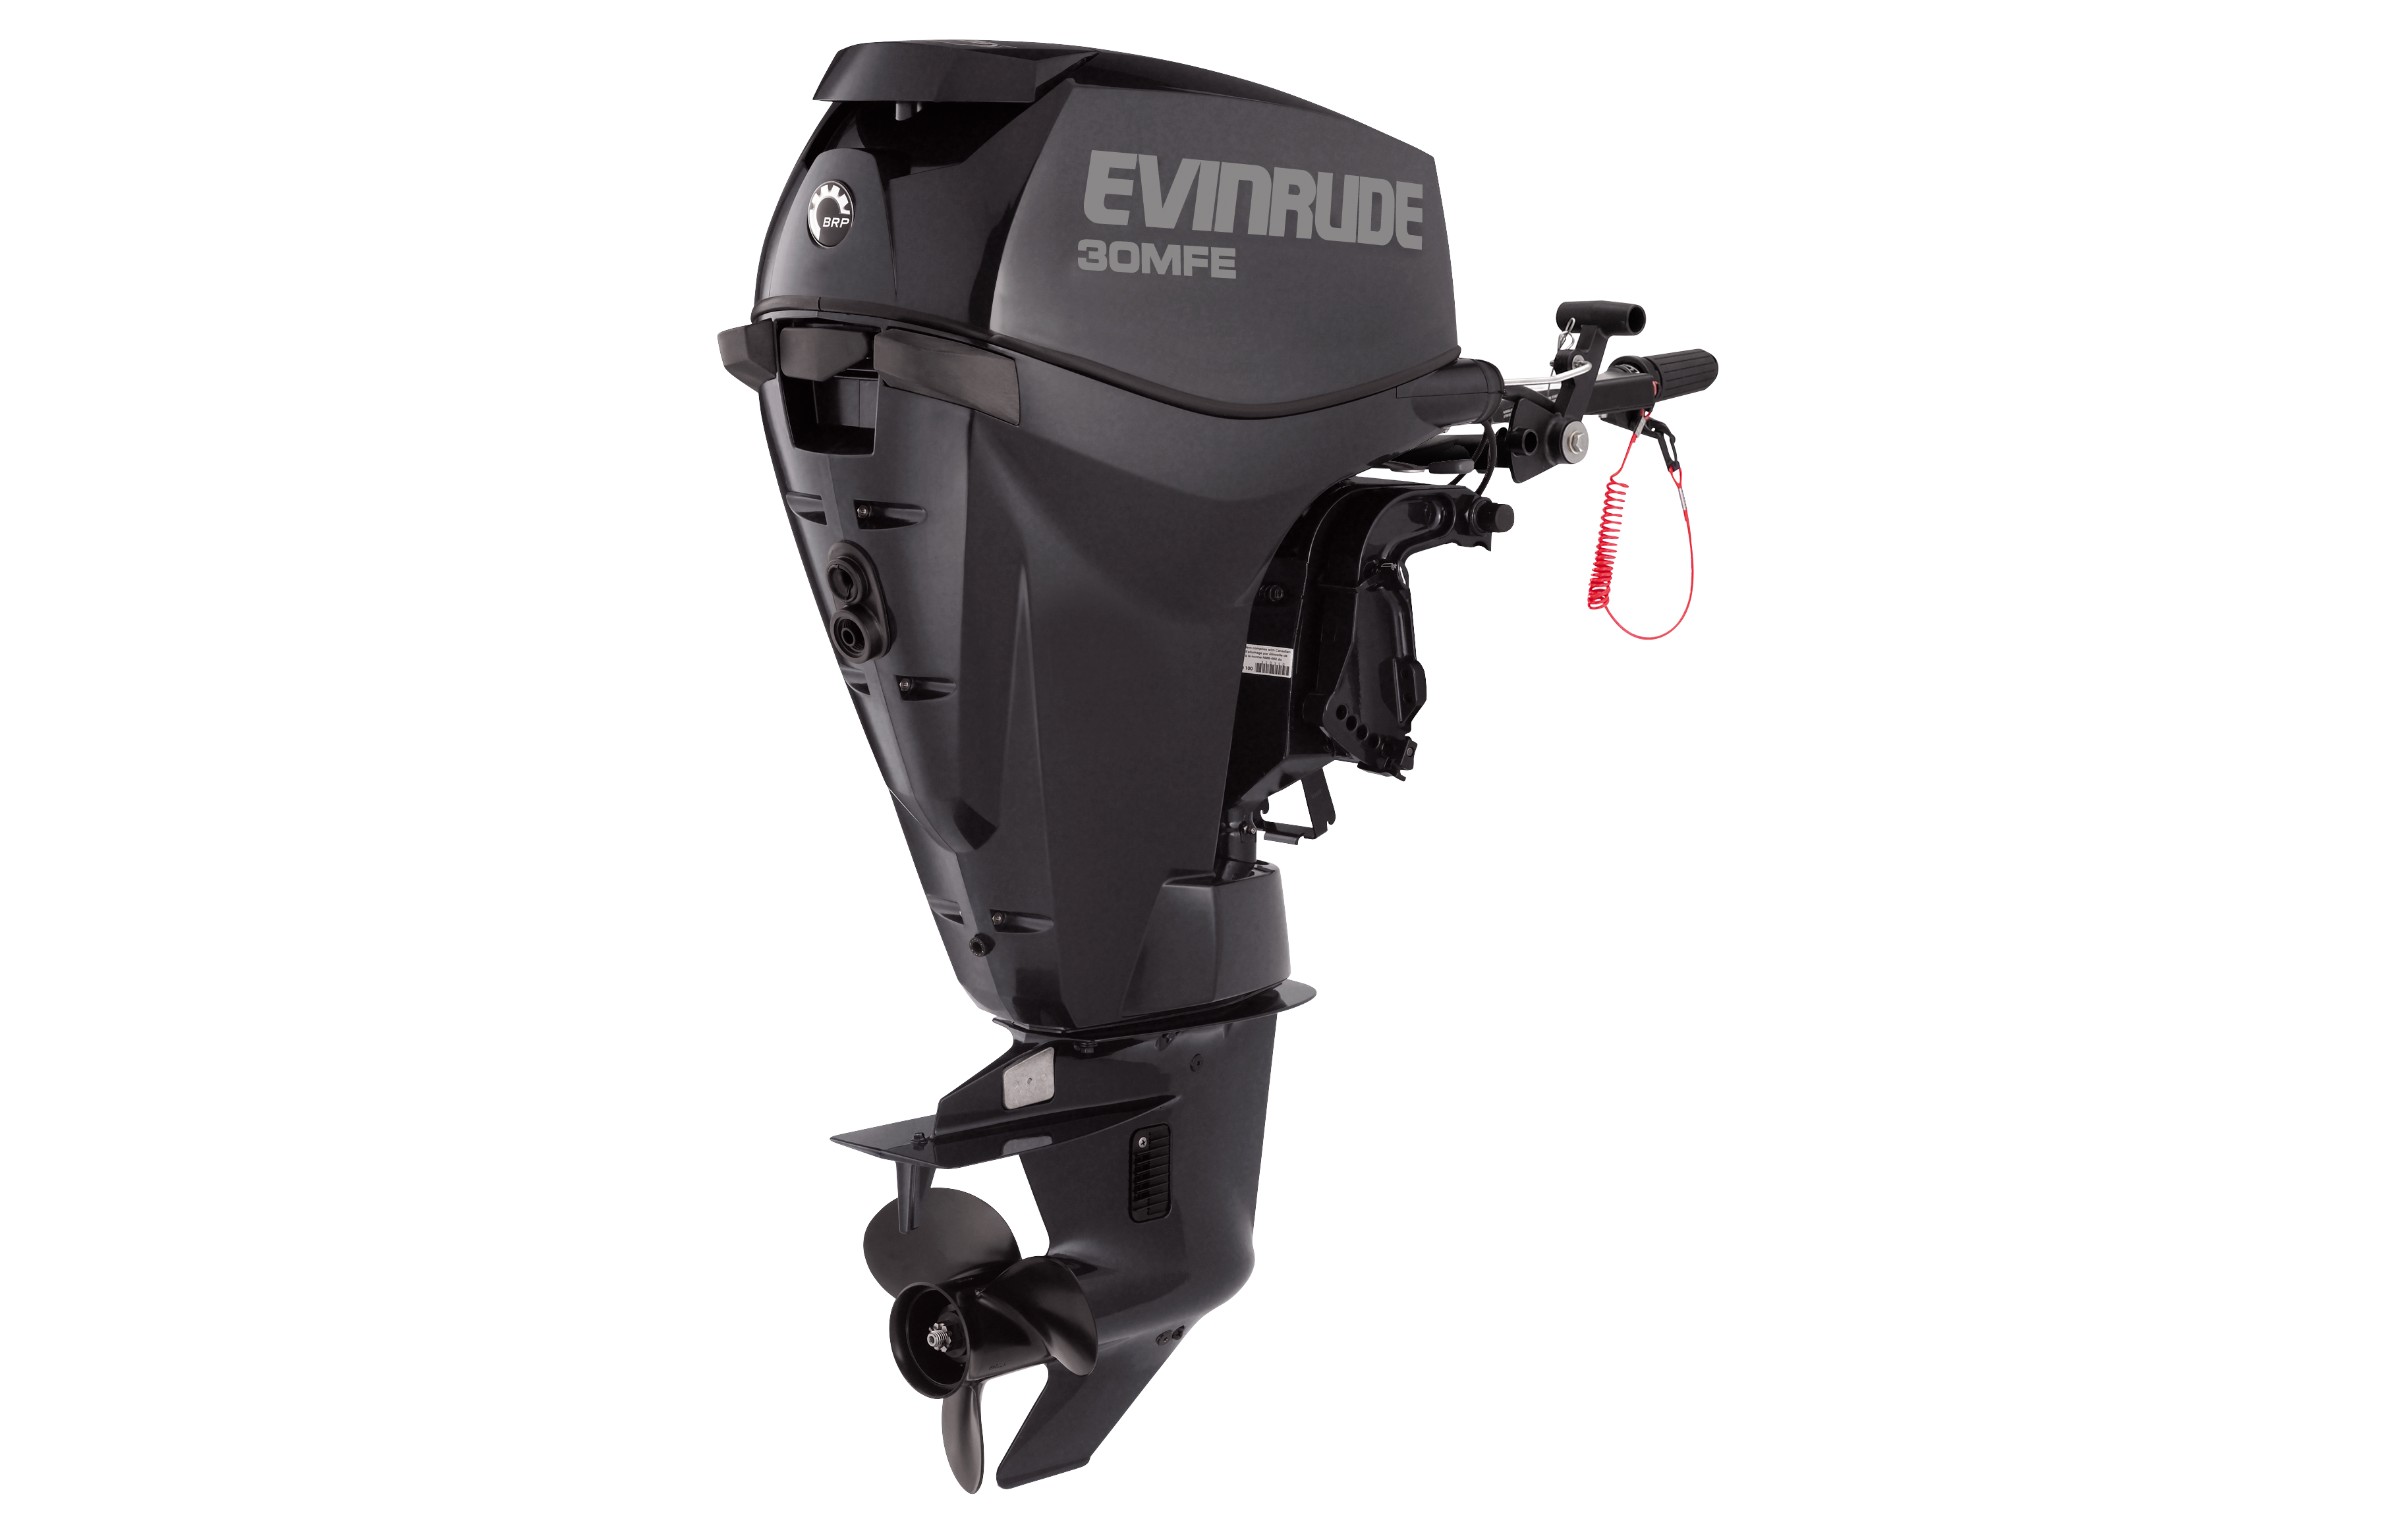 30 Hp Boat Motor by Evinrude